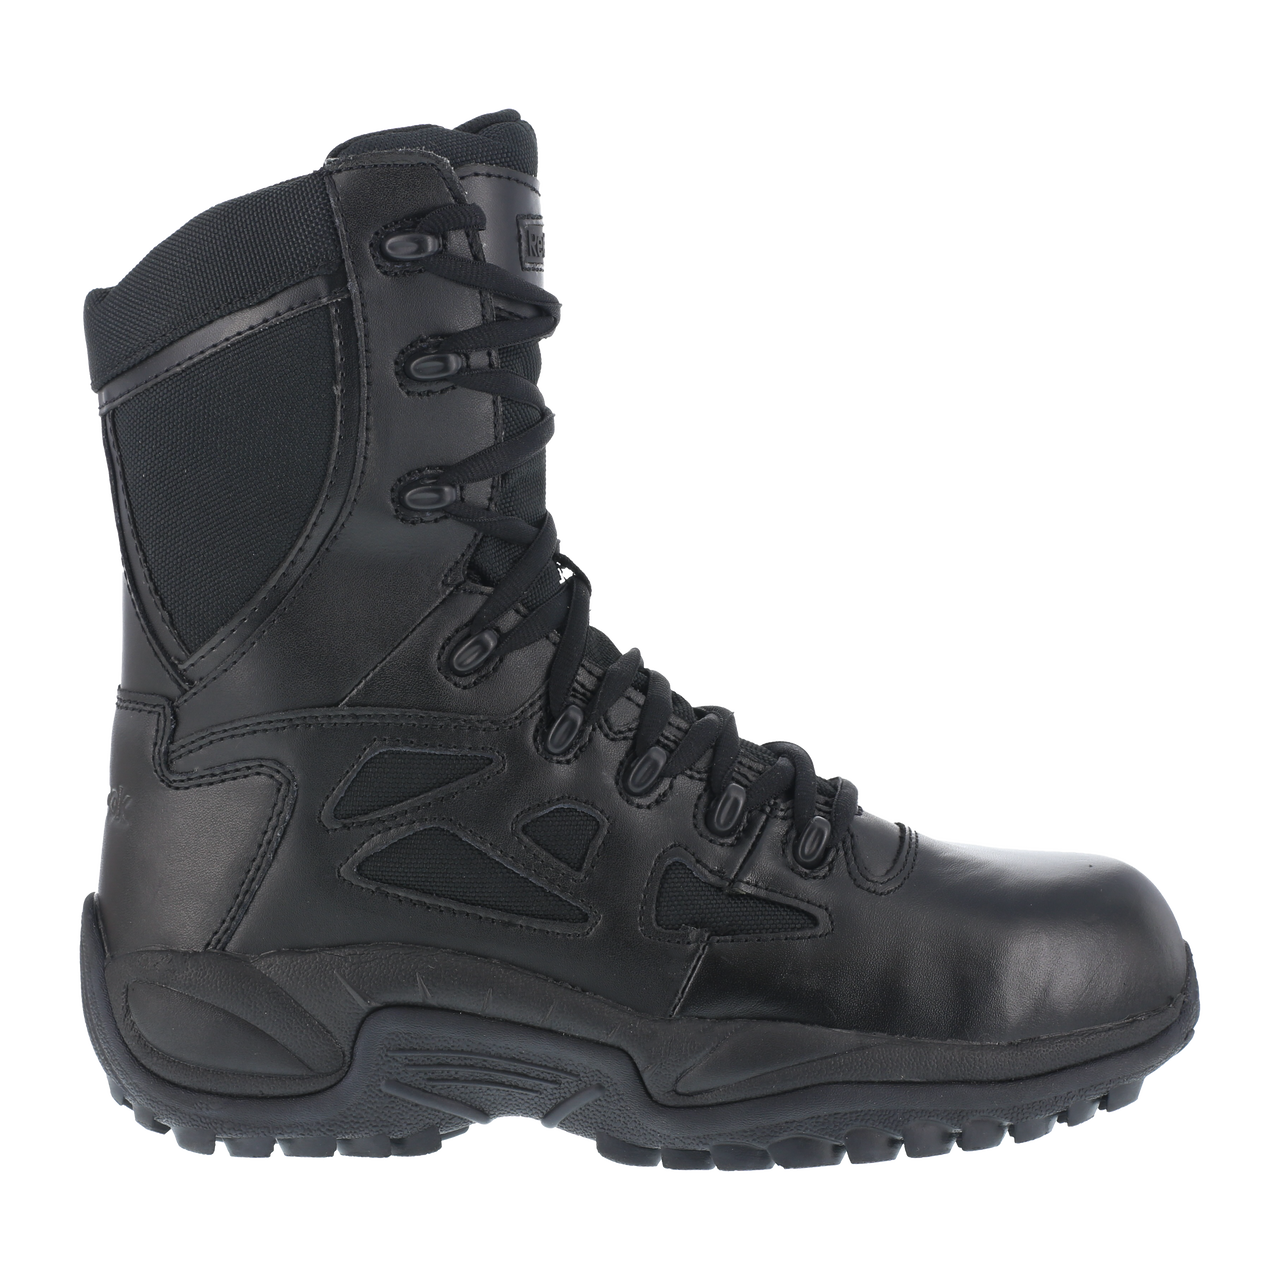 Reebok Rapid Response 8'' Stealth Boot with Composite Toe - Black RB8874 - Newest Products